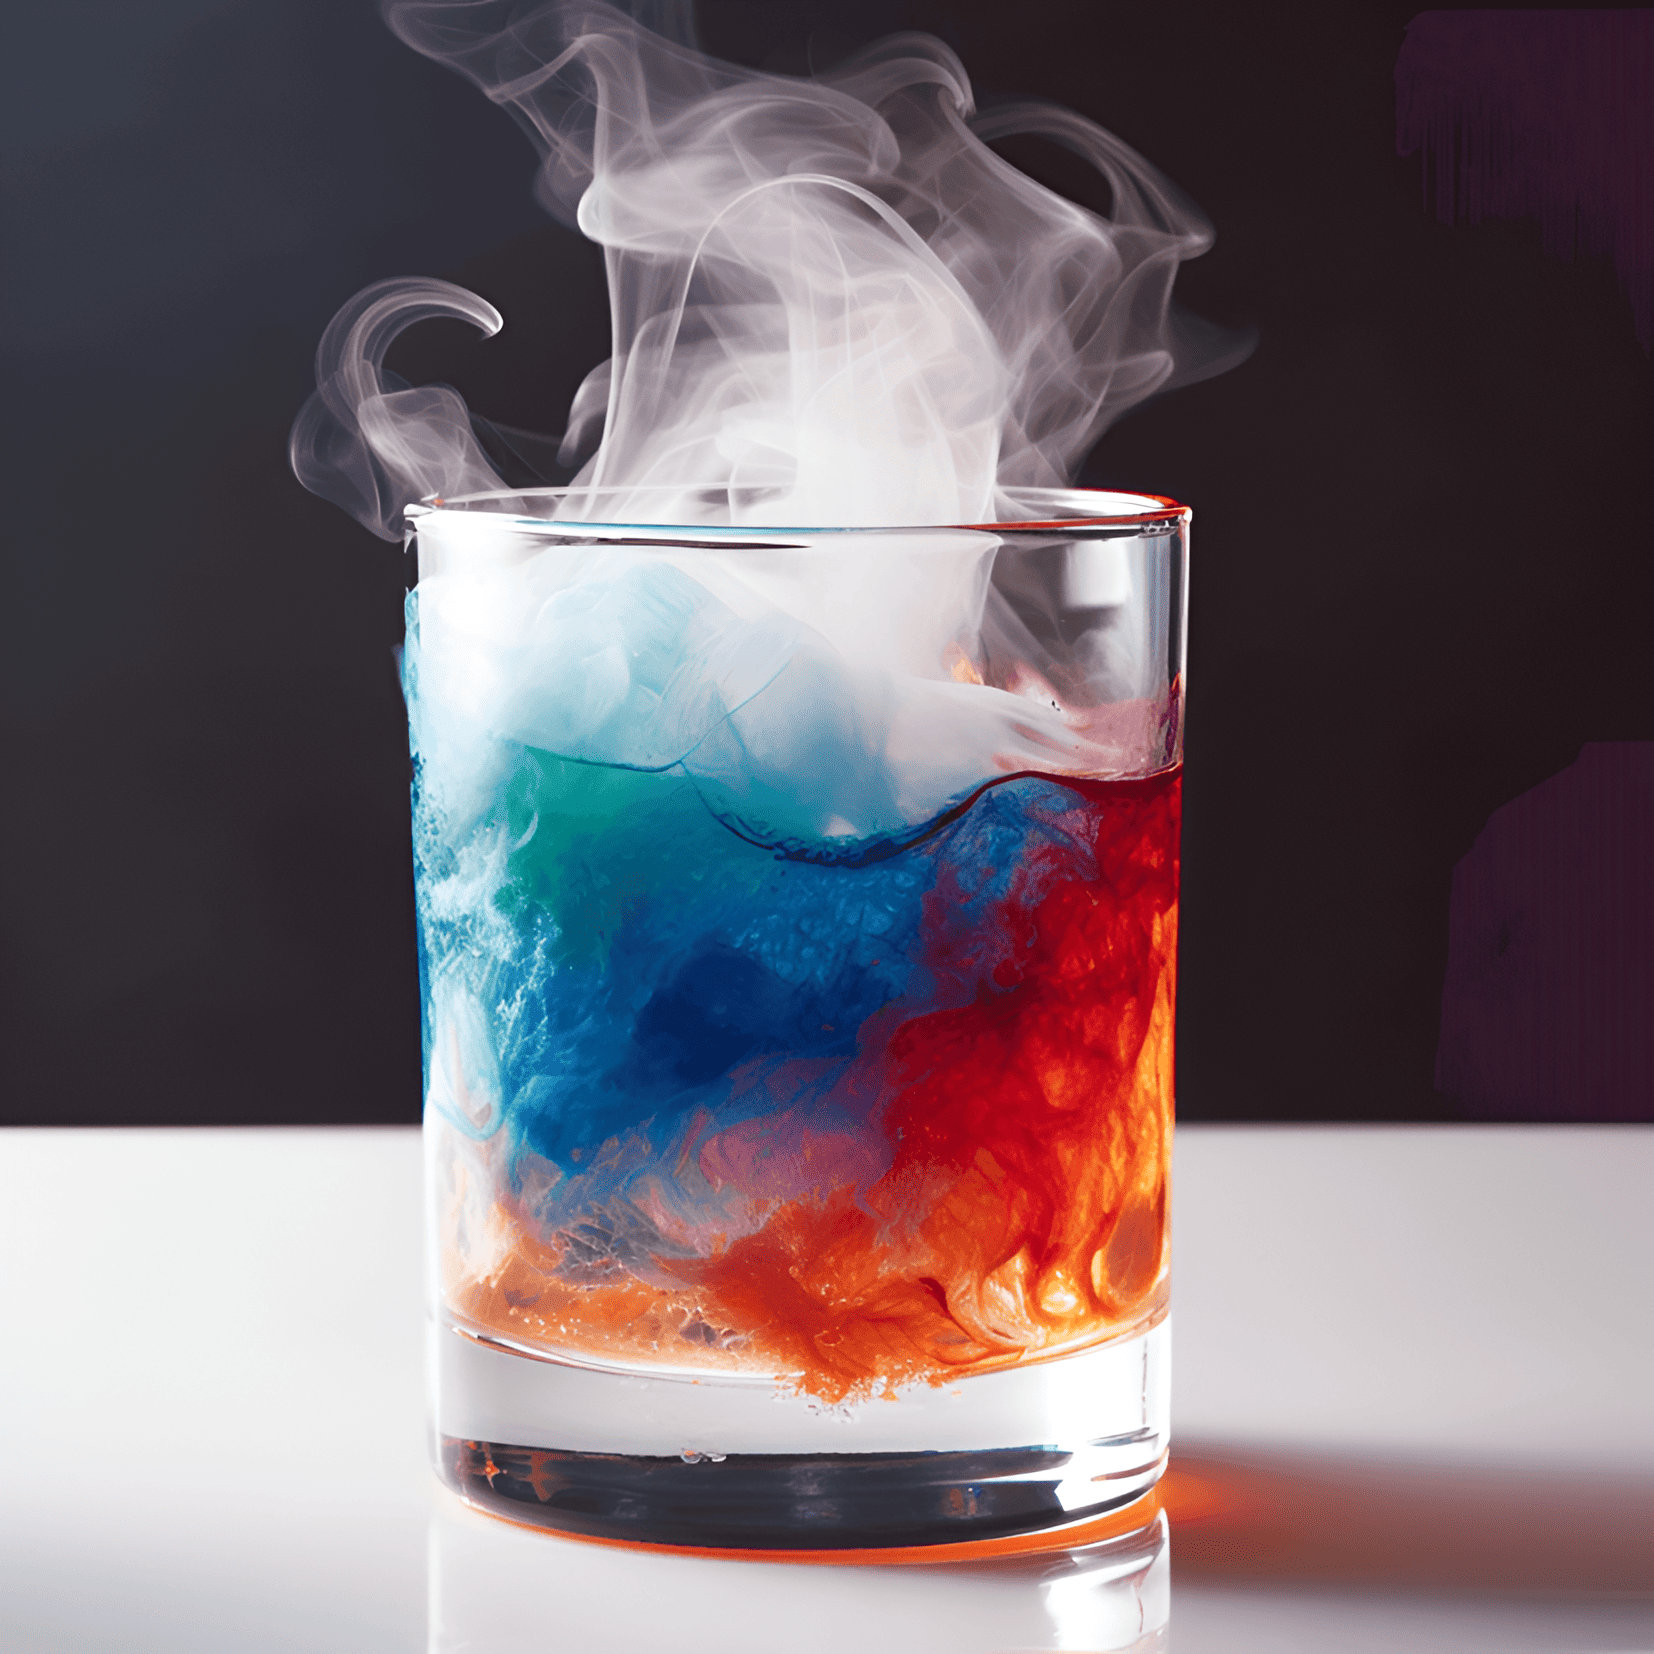 Fire and Ice Cocktail Recipe - The Fire and Ice cocktail has a unique combination of flavors. It starts with a sweet and fruity taste from the grenadine and blue curaçao, followed by a refreshing citrus kick from the lemon juice. The spiciness of the cinnamon schnapps adds a fiery touch, while the cooling sensation of the mint leaves balances it out.